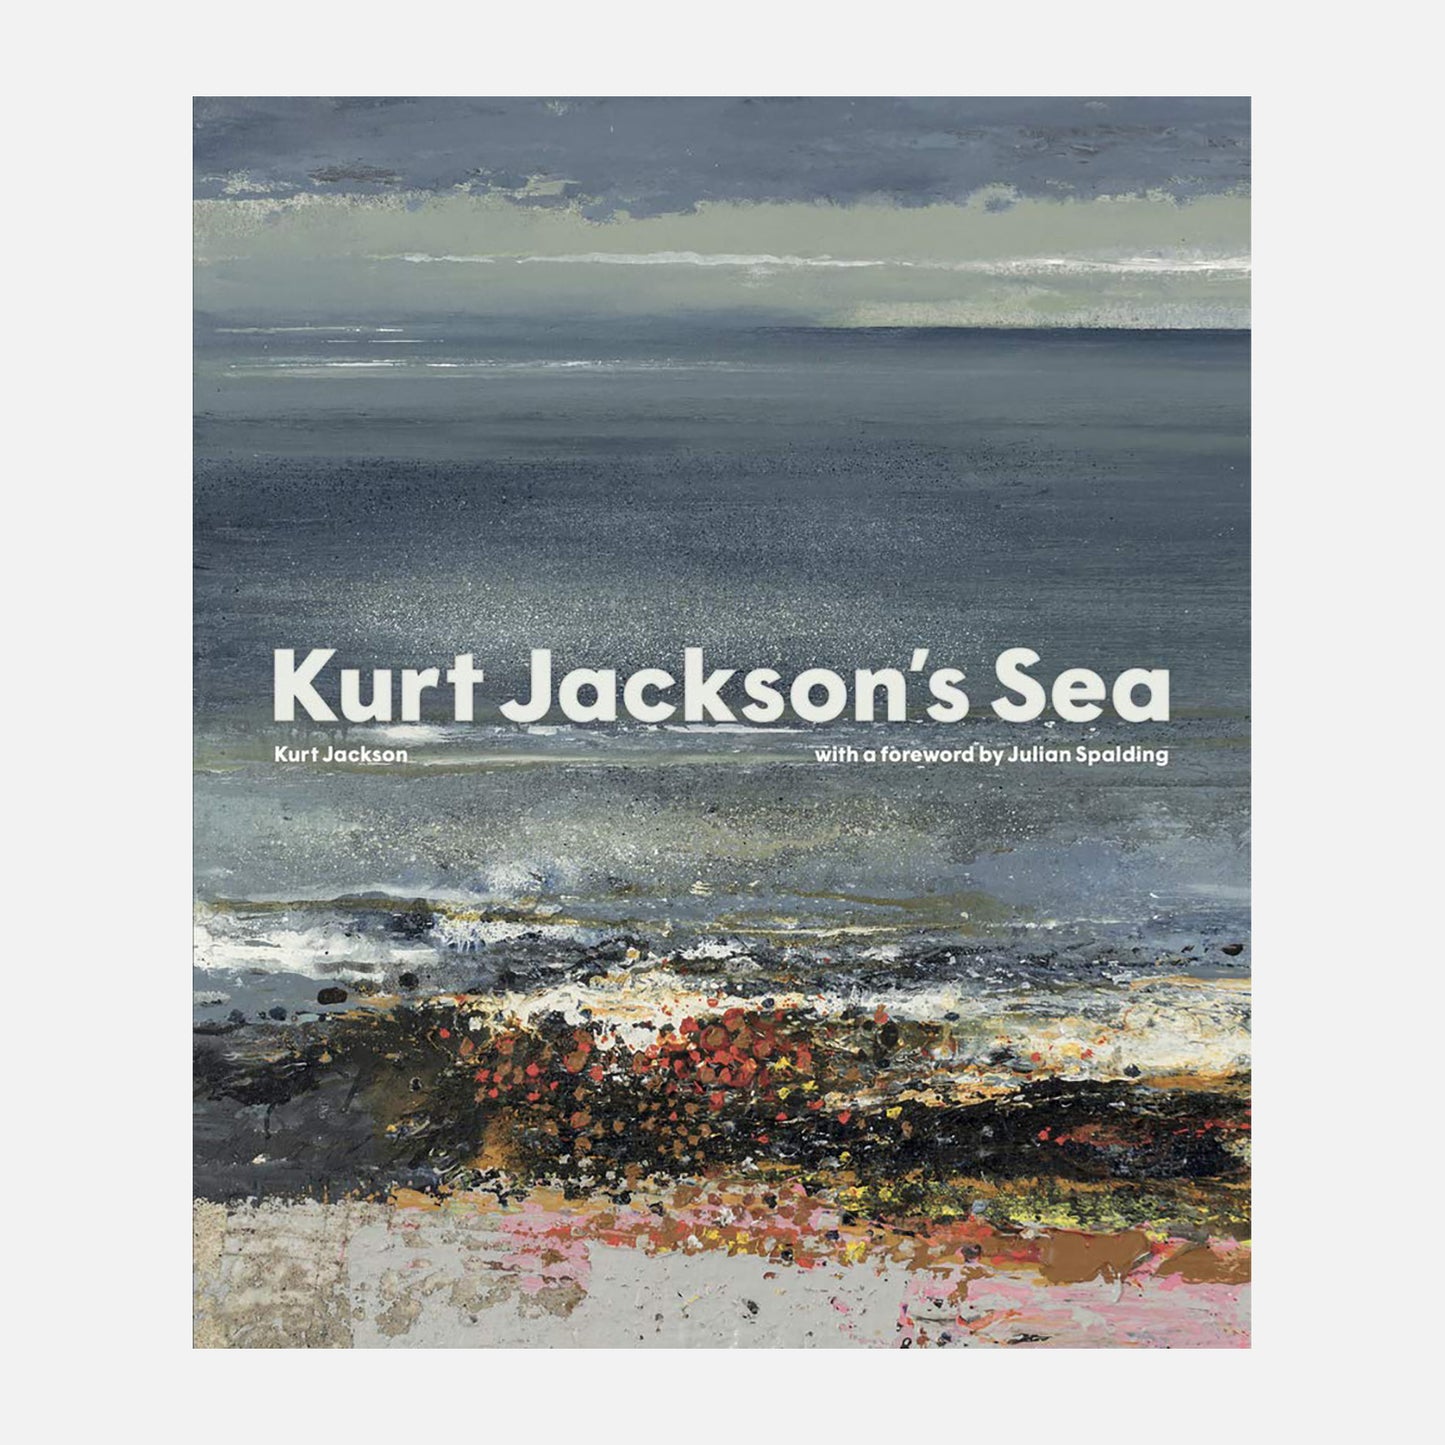 Image of the front of the Kurt Jackson's Sea book showing a steel blue grey sky and sea with colourful beach details 